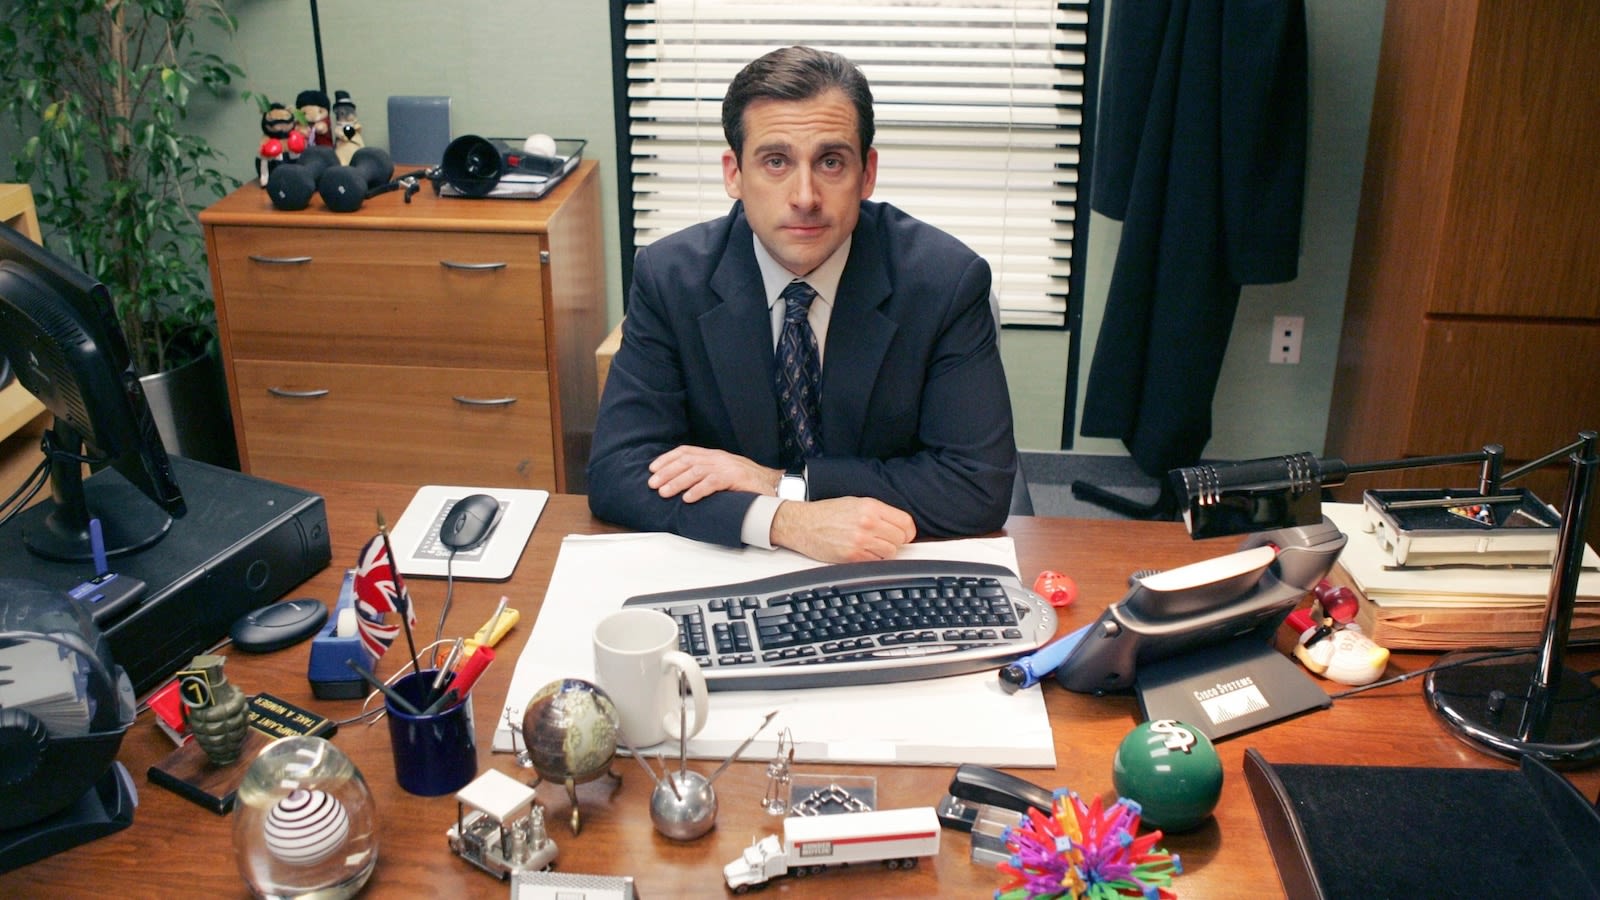 'The Office' spinoff announced: Details on plot and cast revealed